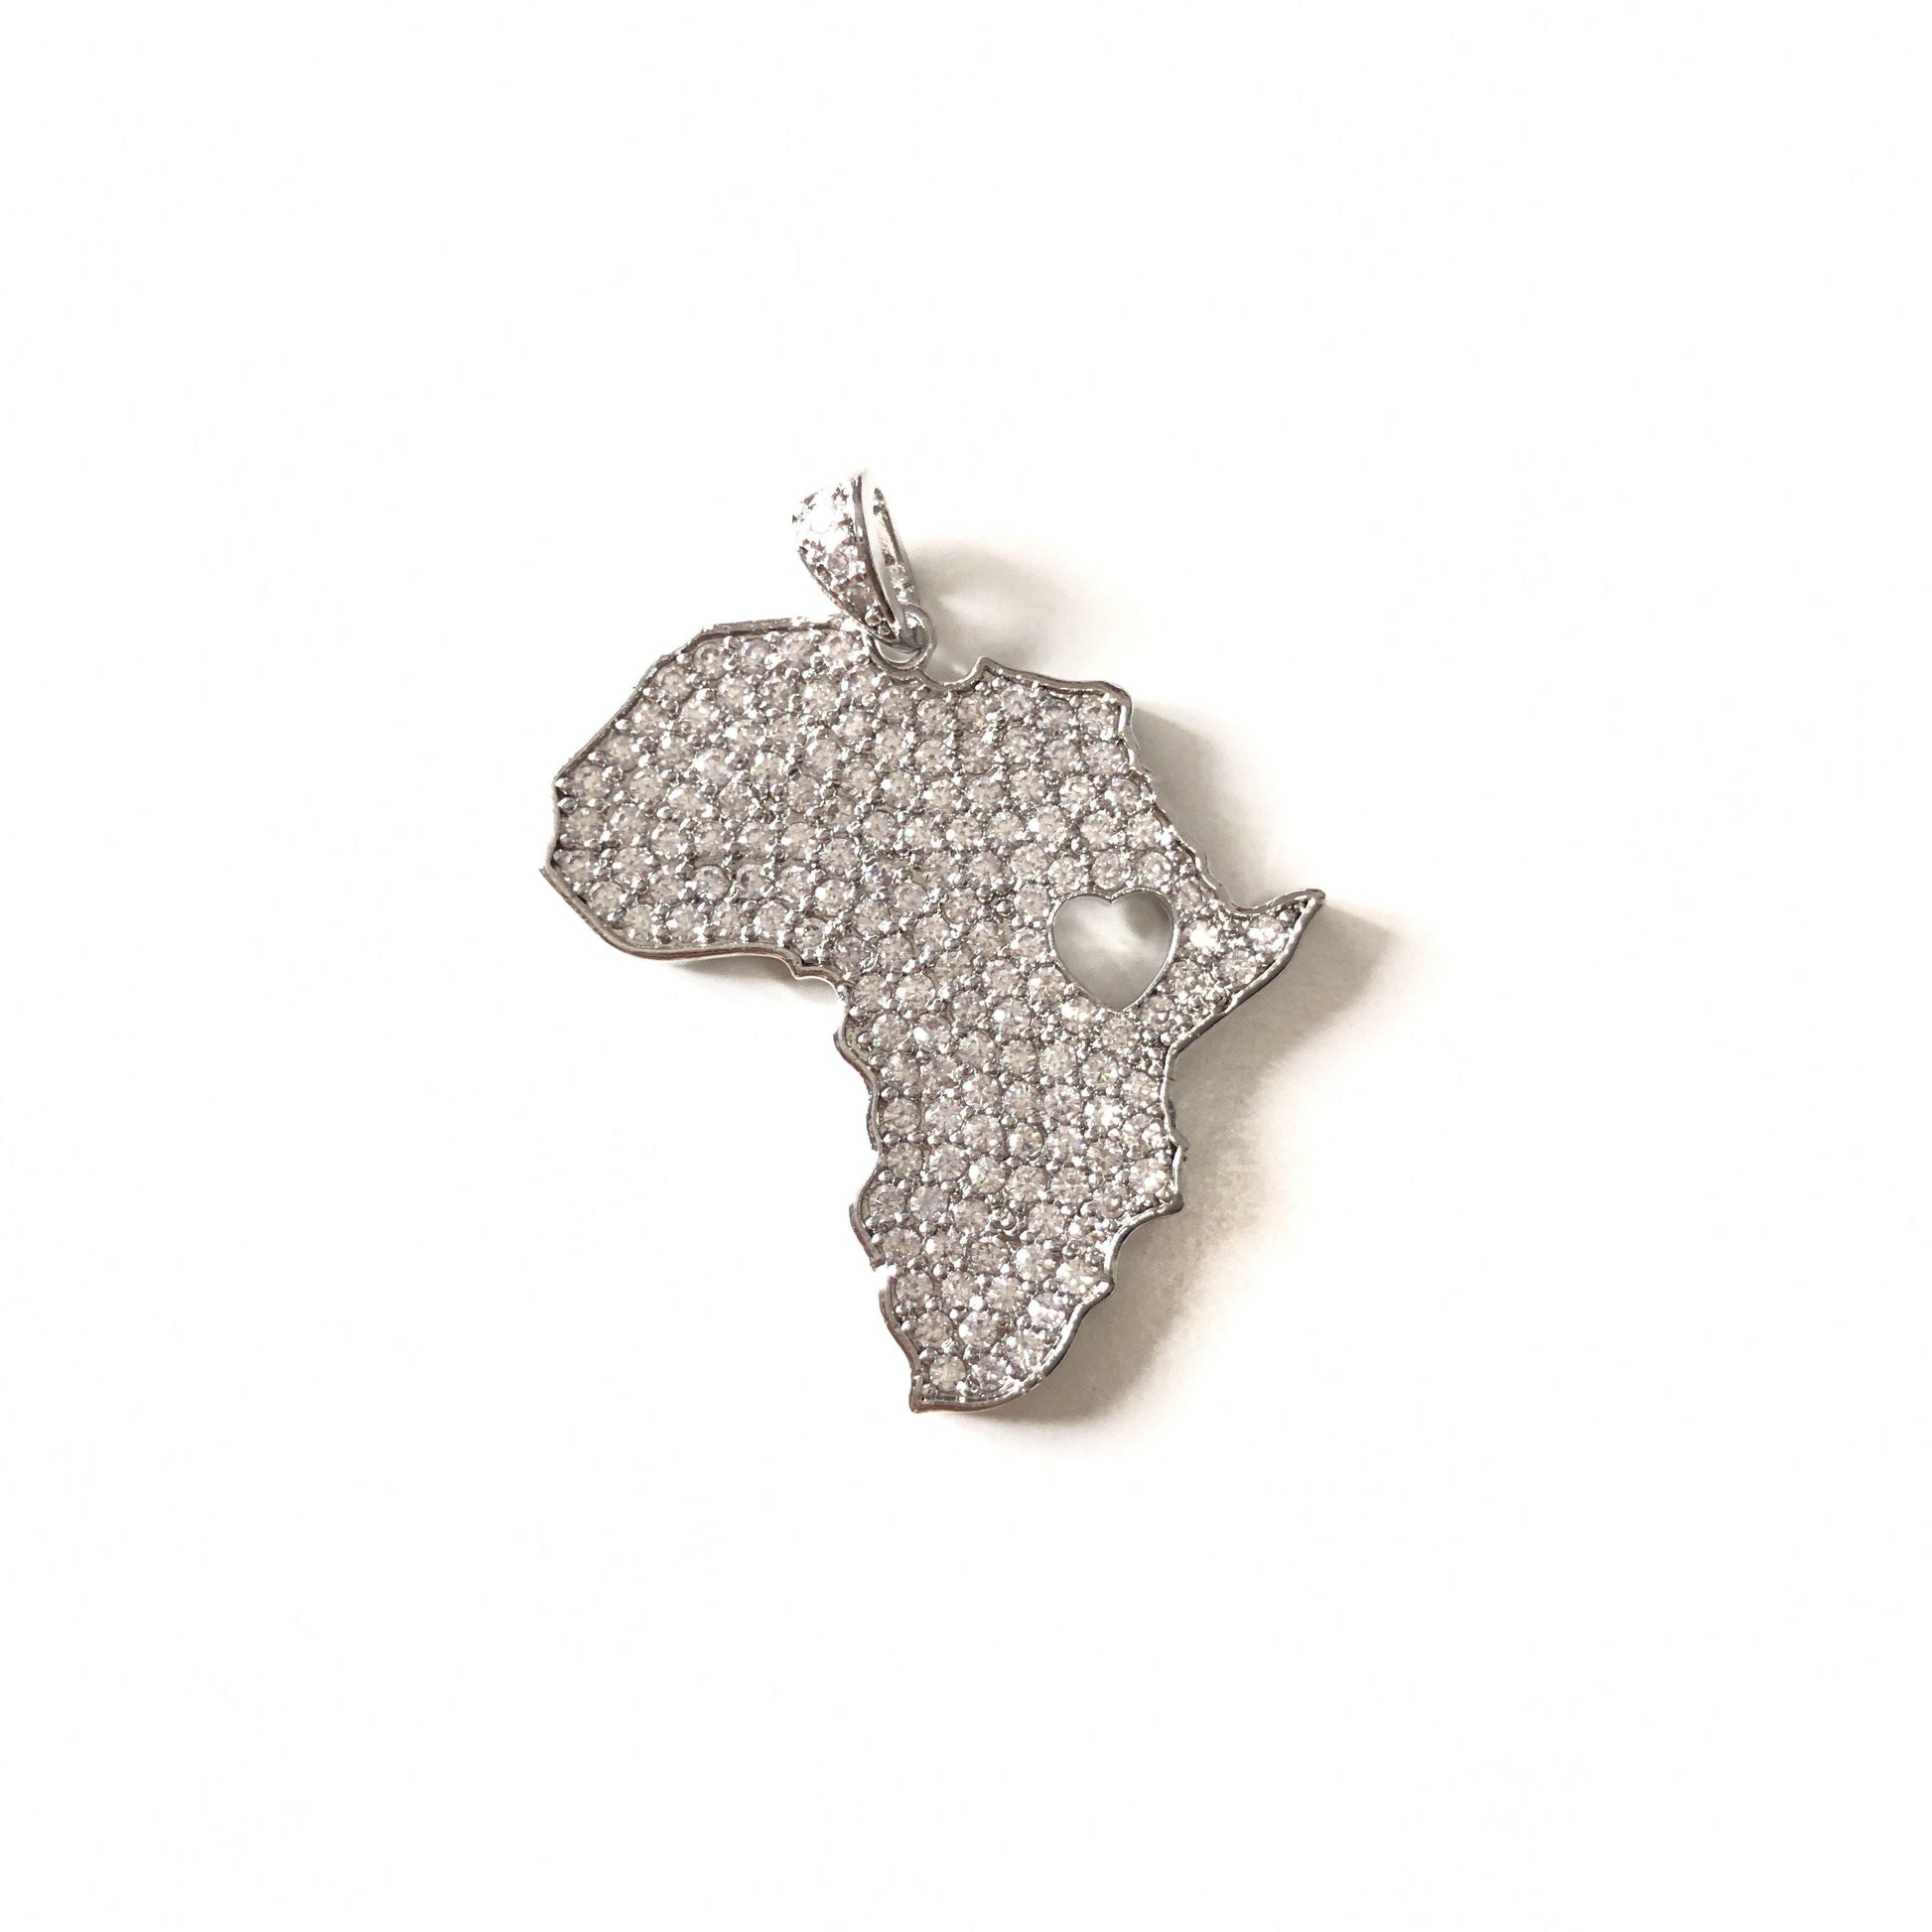 10pcs/lot 35*29mm CZ Paved Love Africa Charms Black History Month Juneteenth Awareness Silver CZ Paved Charms Juneteenth & Black History Month Awareness Maps Charms Beads Beyond